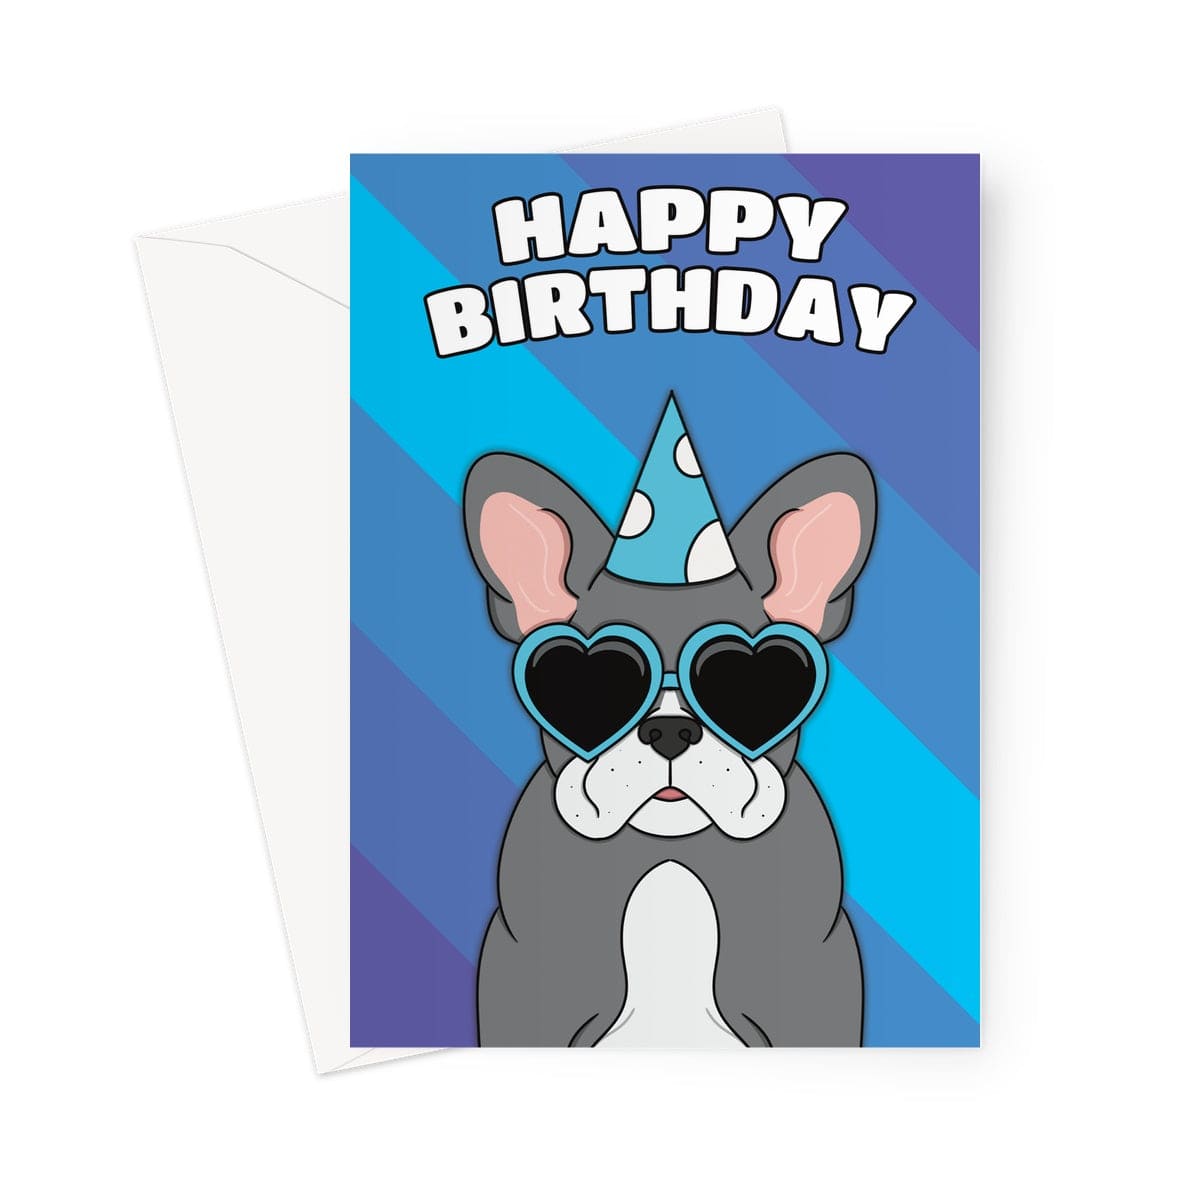 A playful and colourful birthday card featuring an adorable Frenchie Dog wearing a party hat 